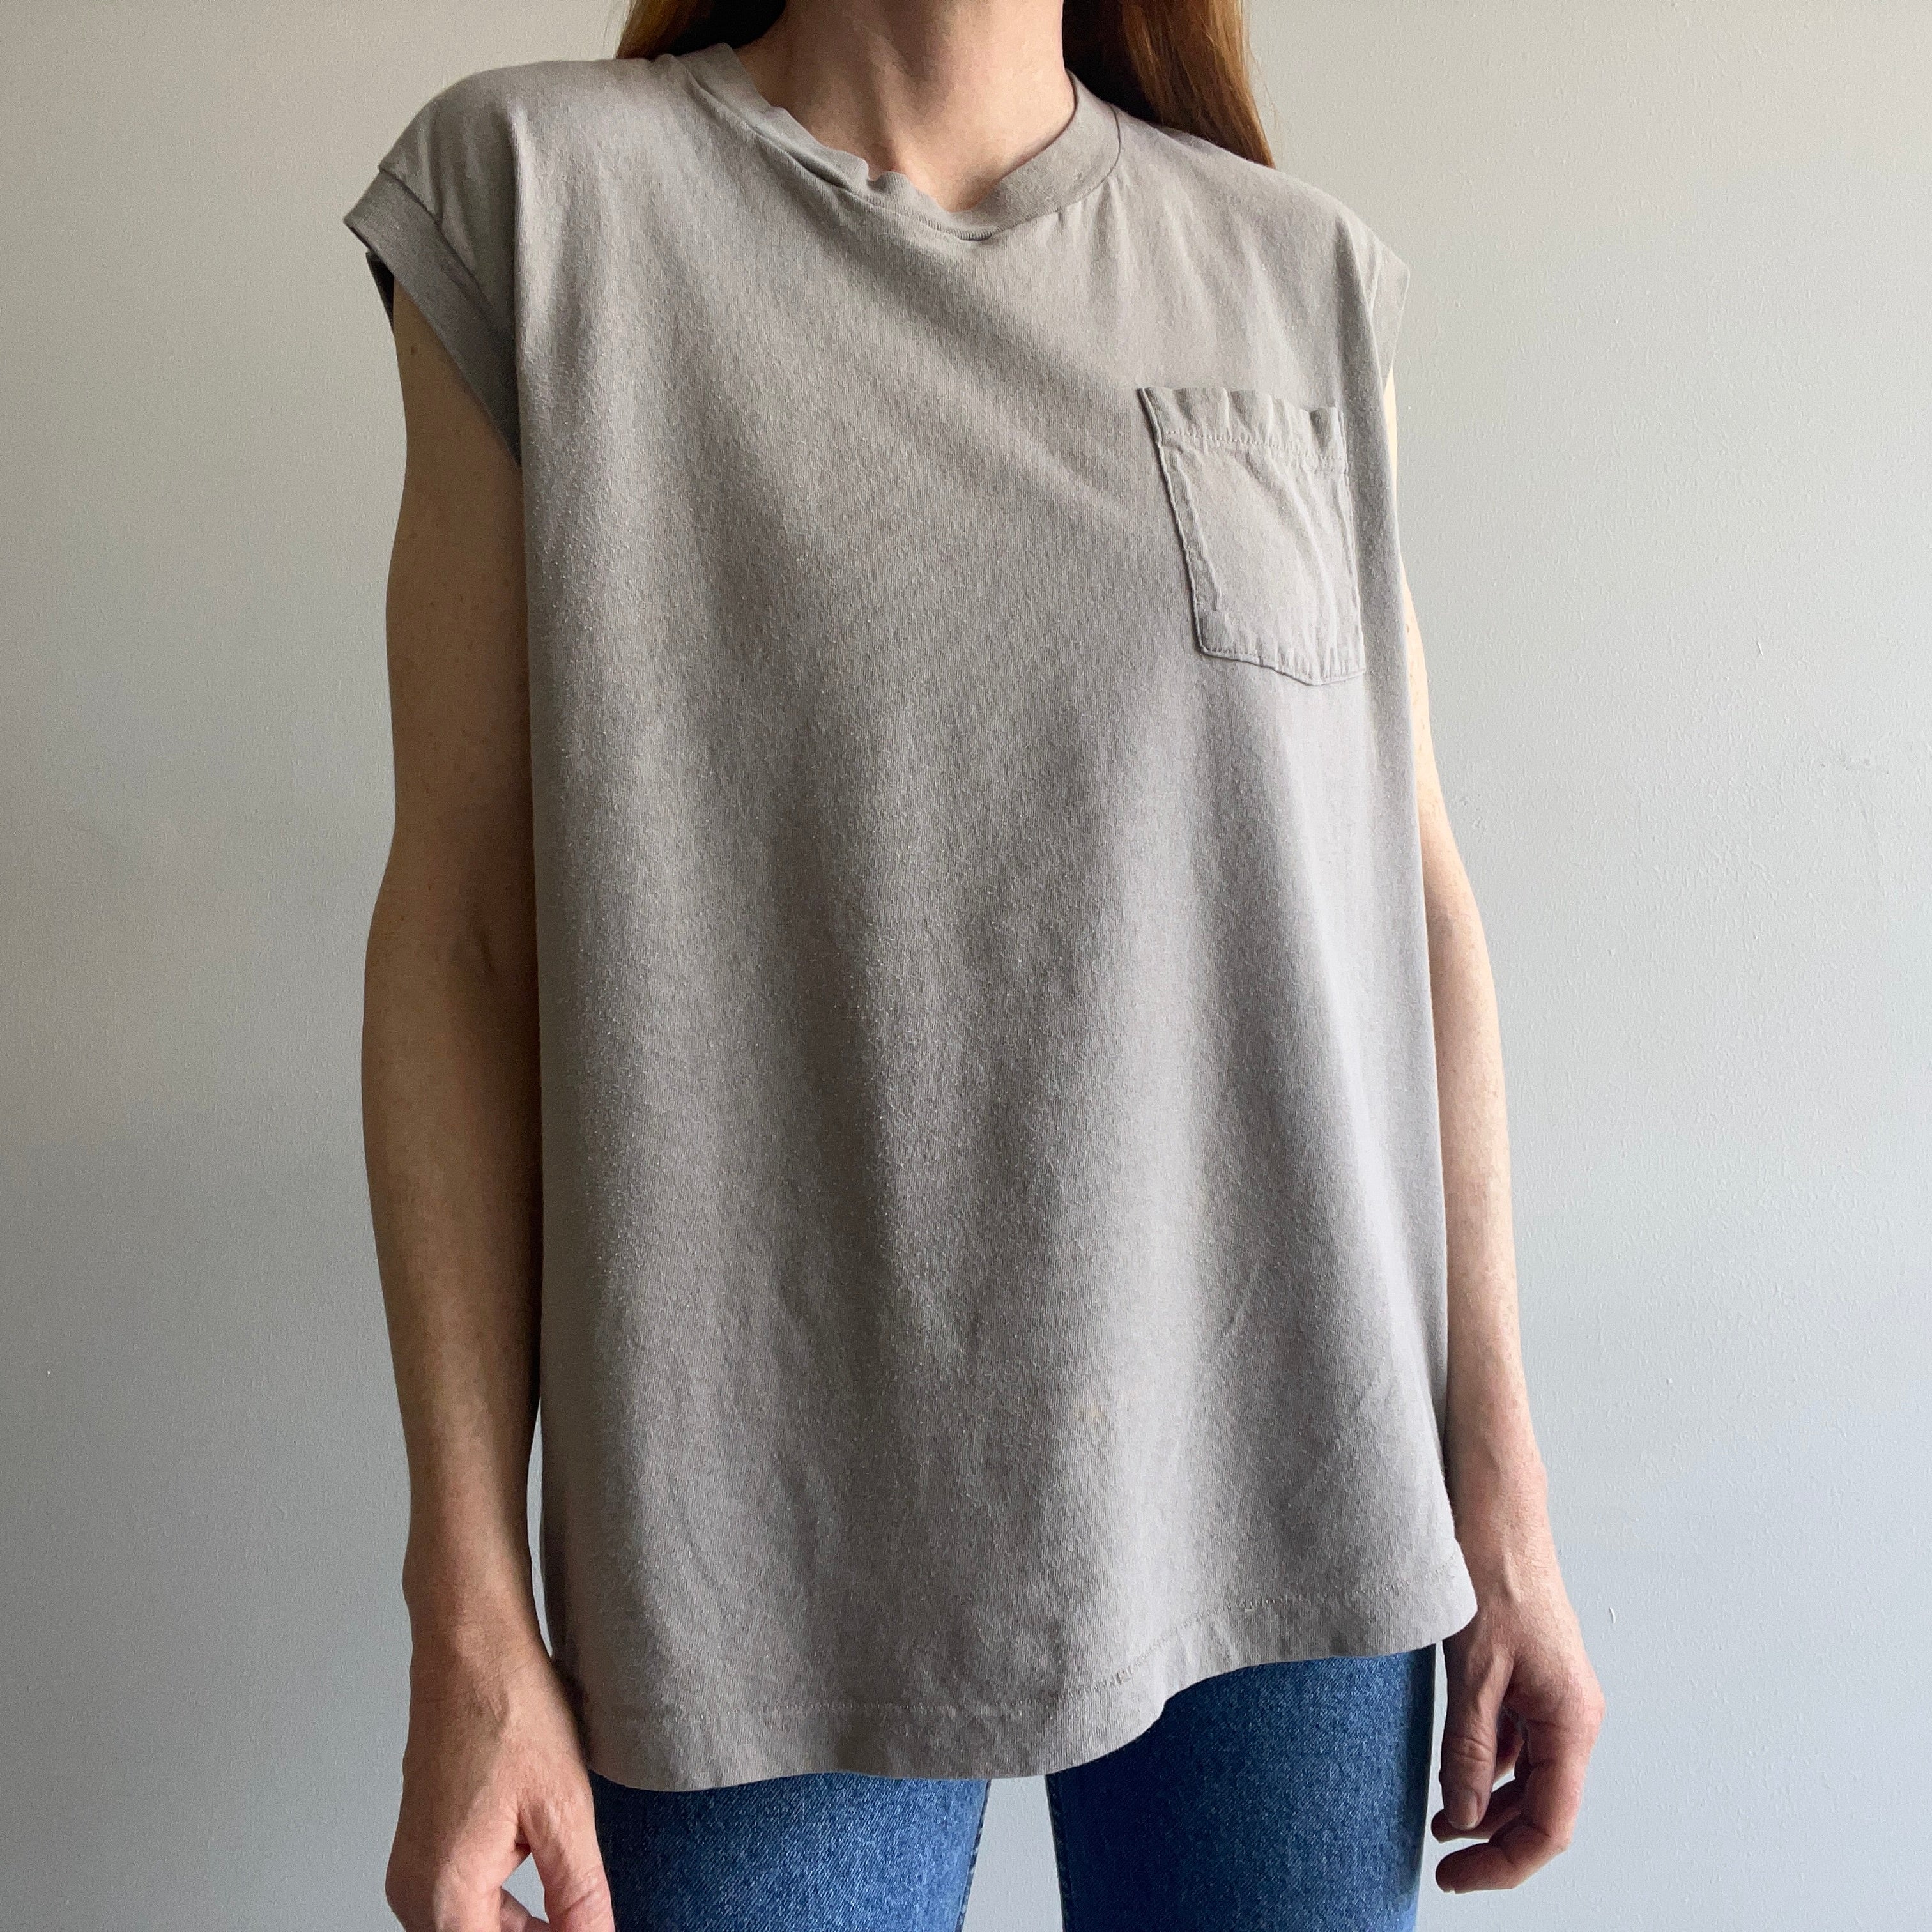 1980s Khaki Muscle Tank Top with a Selvedge Pocket